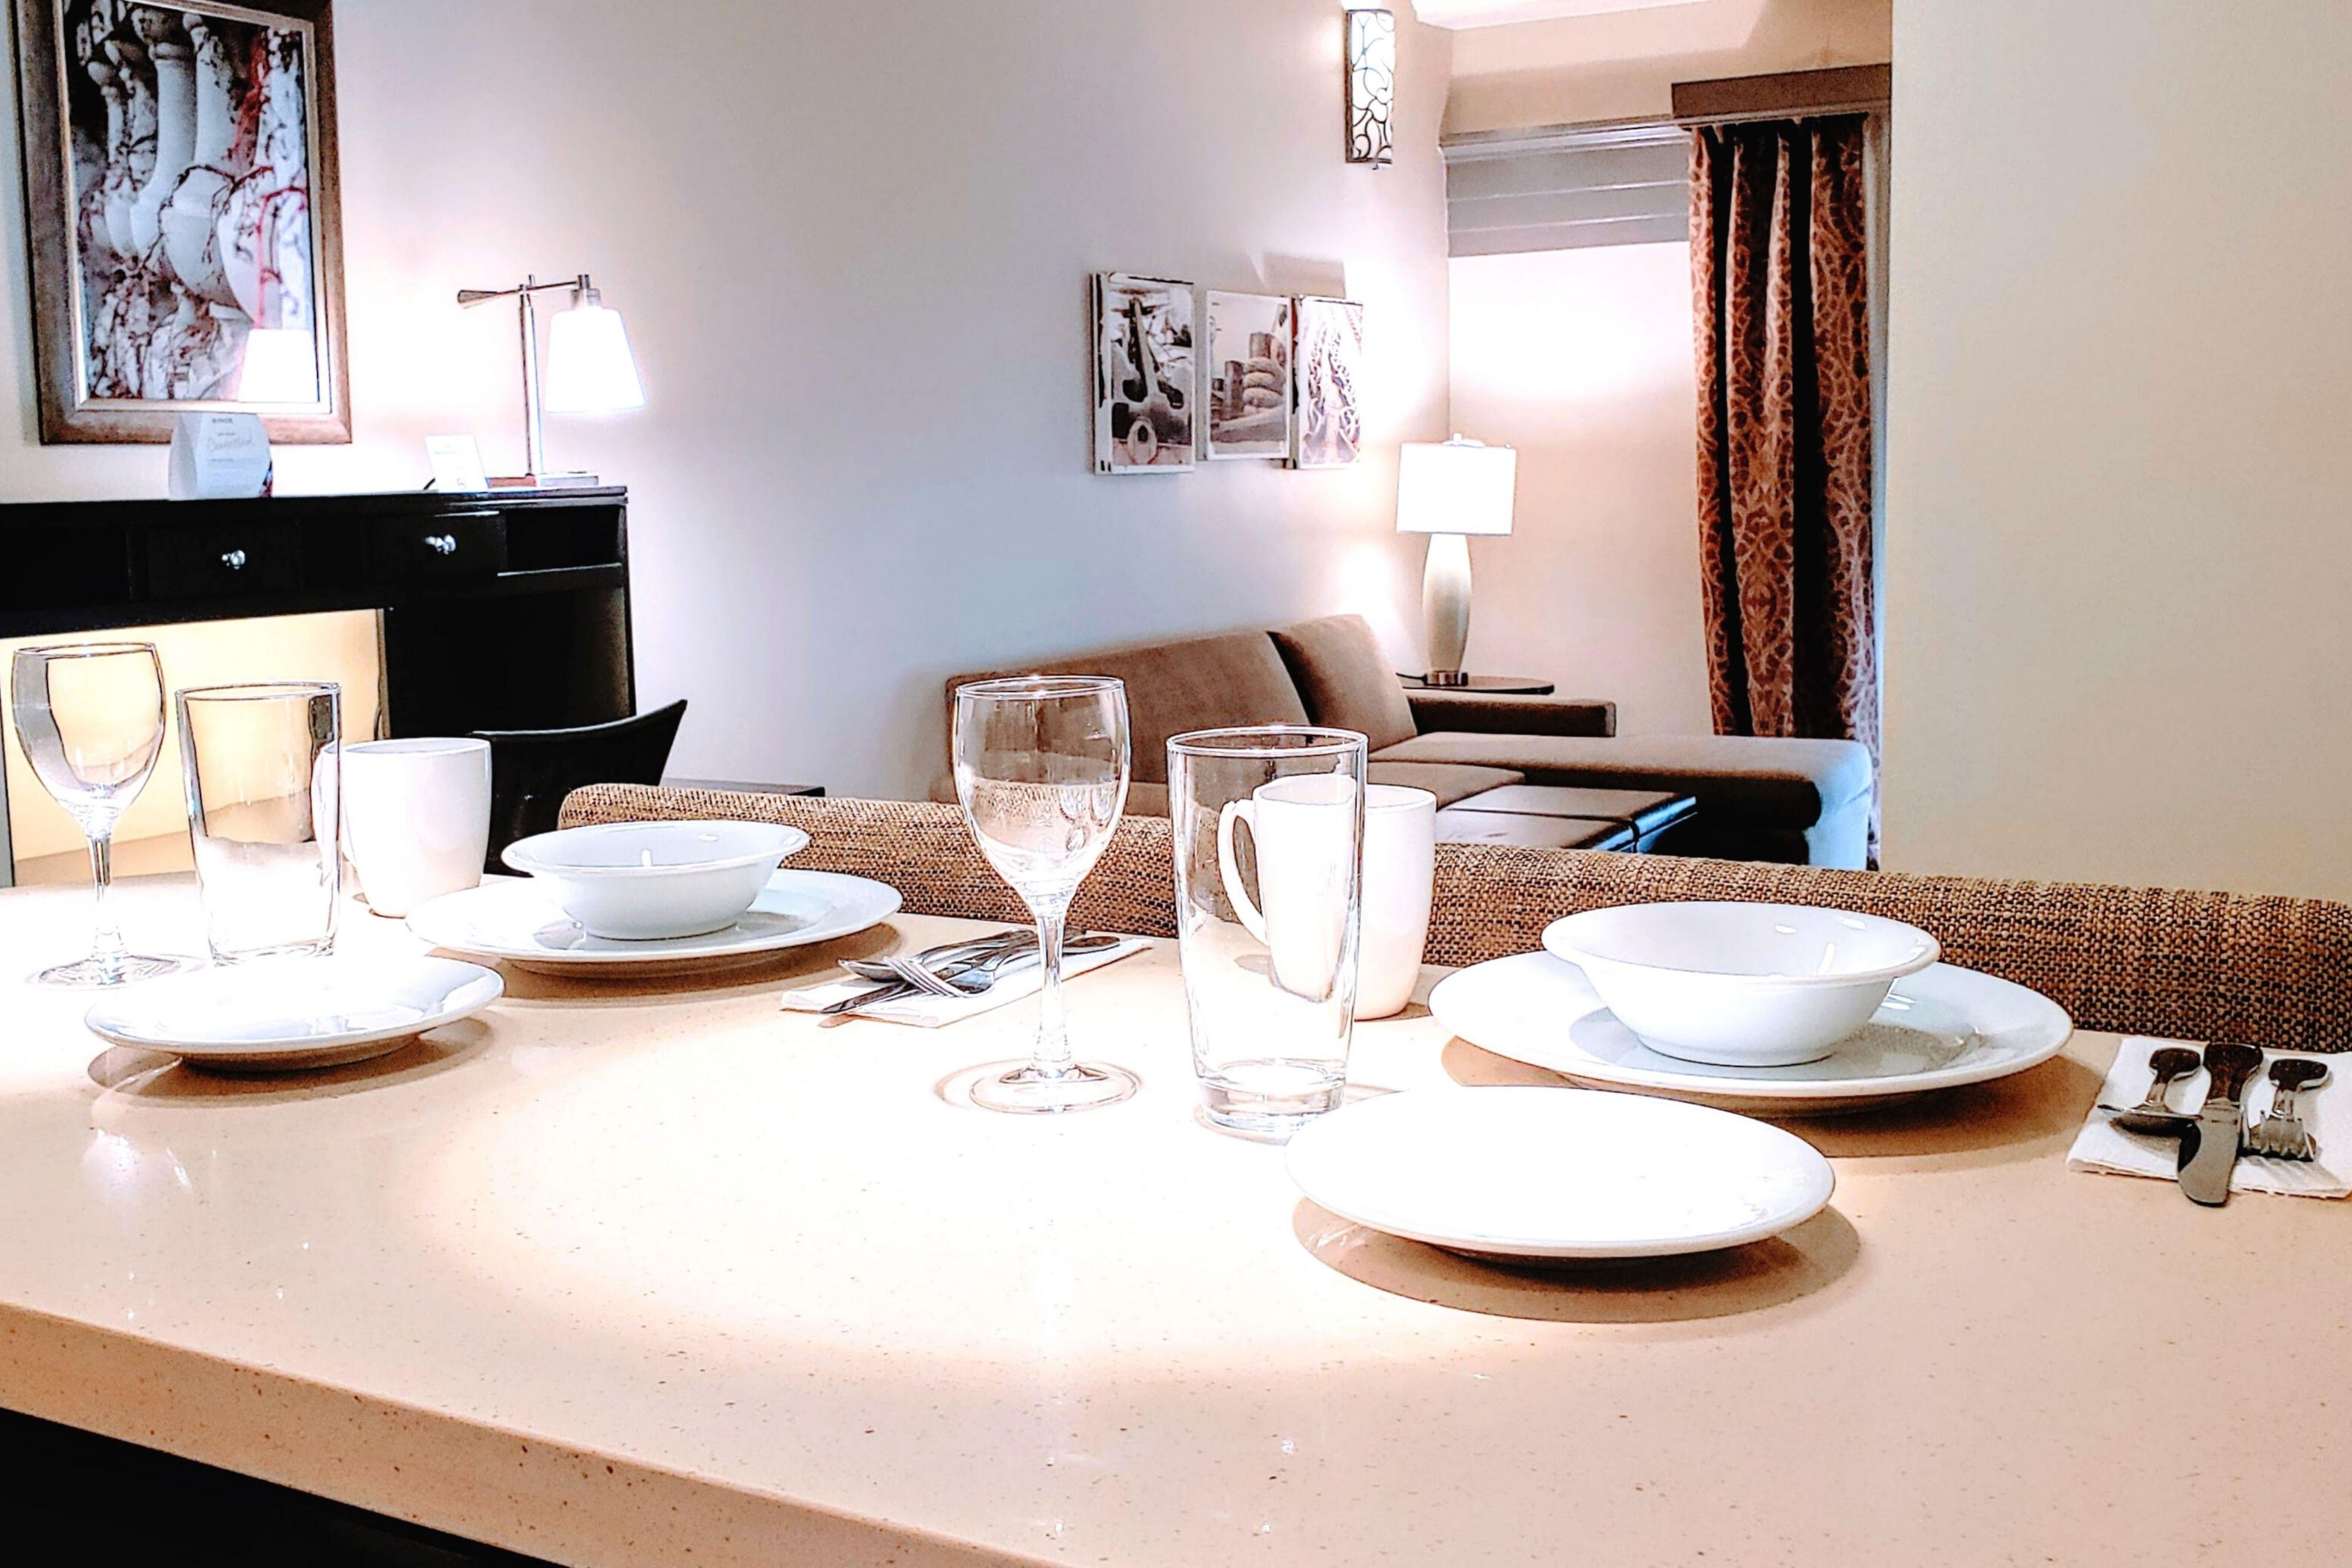 As an all-suite property, all our rooms include a full kitchen equipped with dining essentials including pots, pans, cooking utensils, plateware, and silverware. We are designed for long-term comfort!